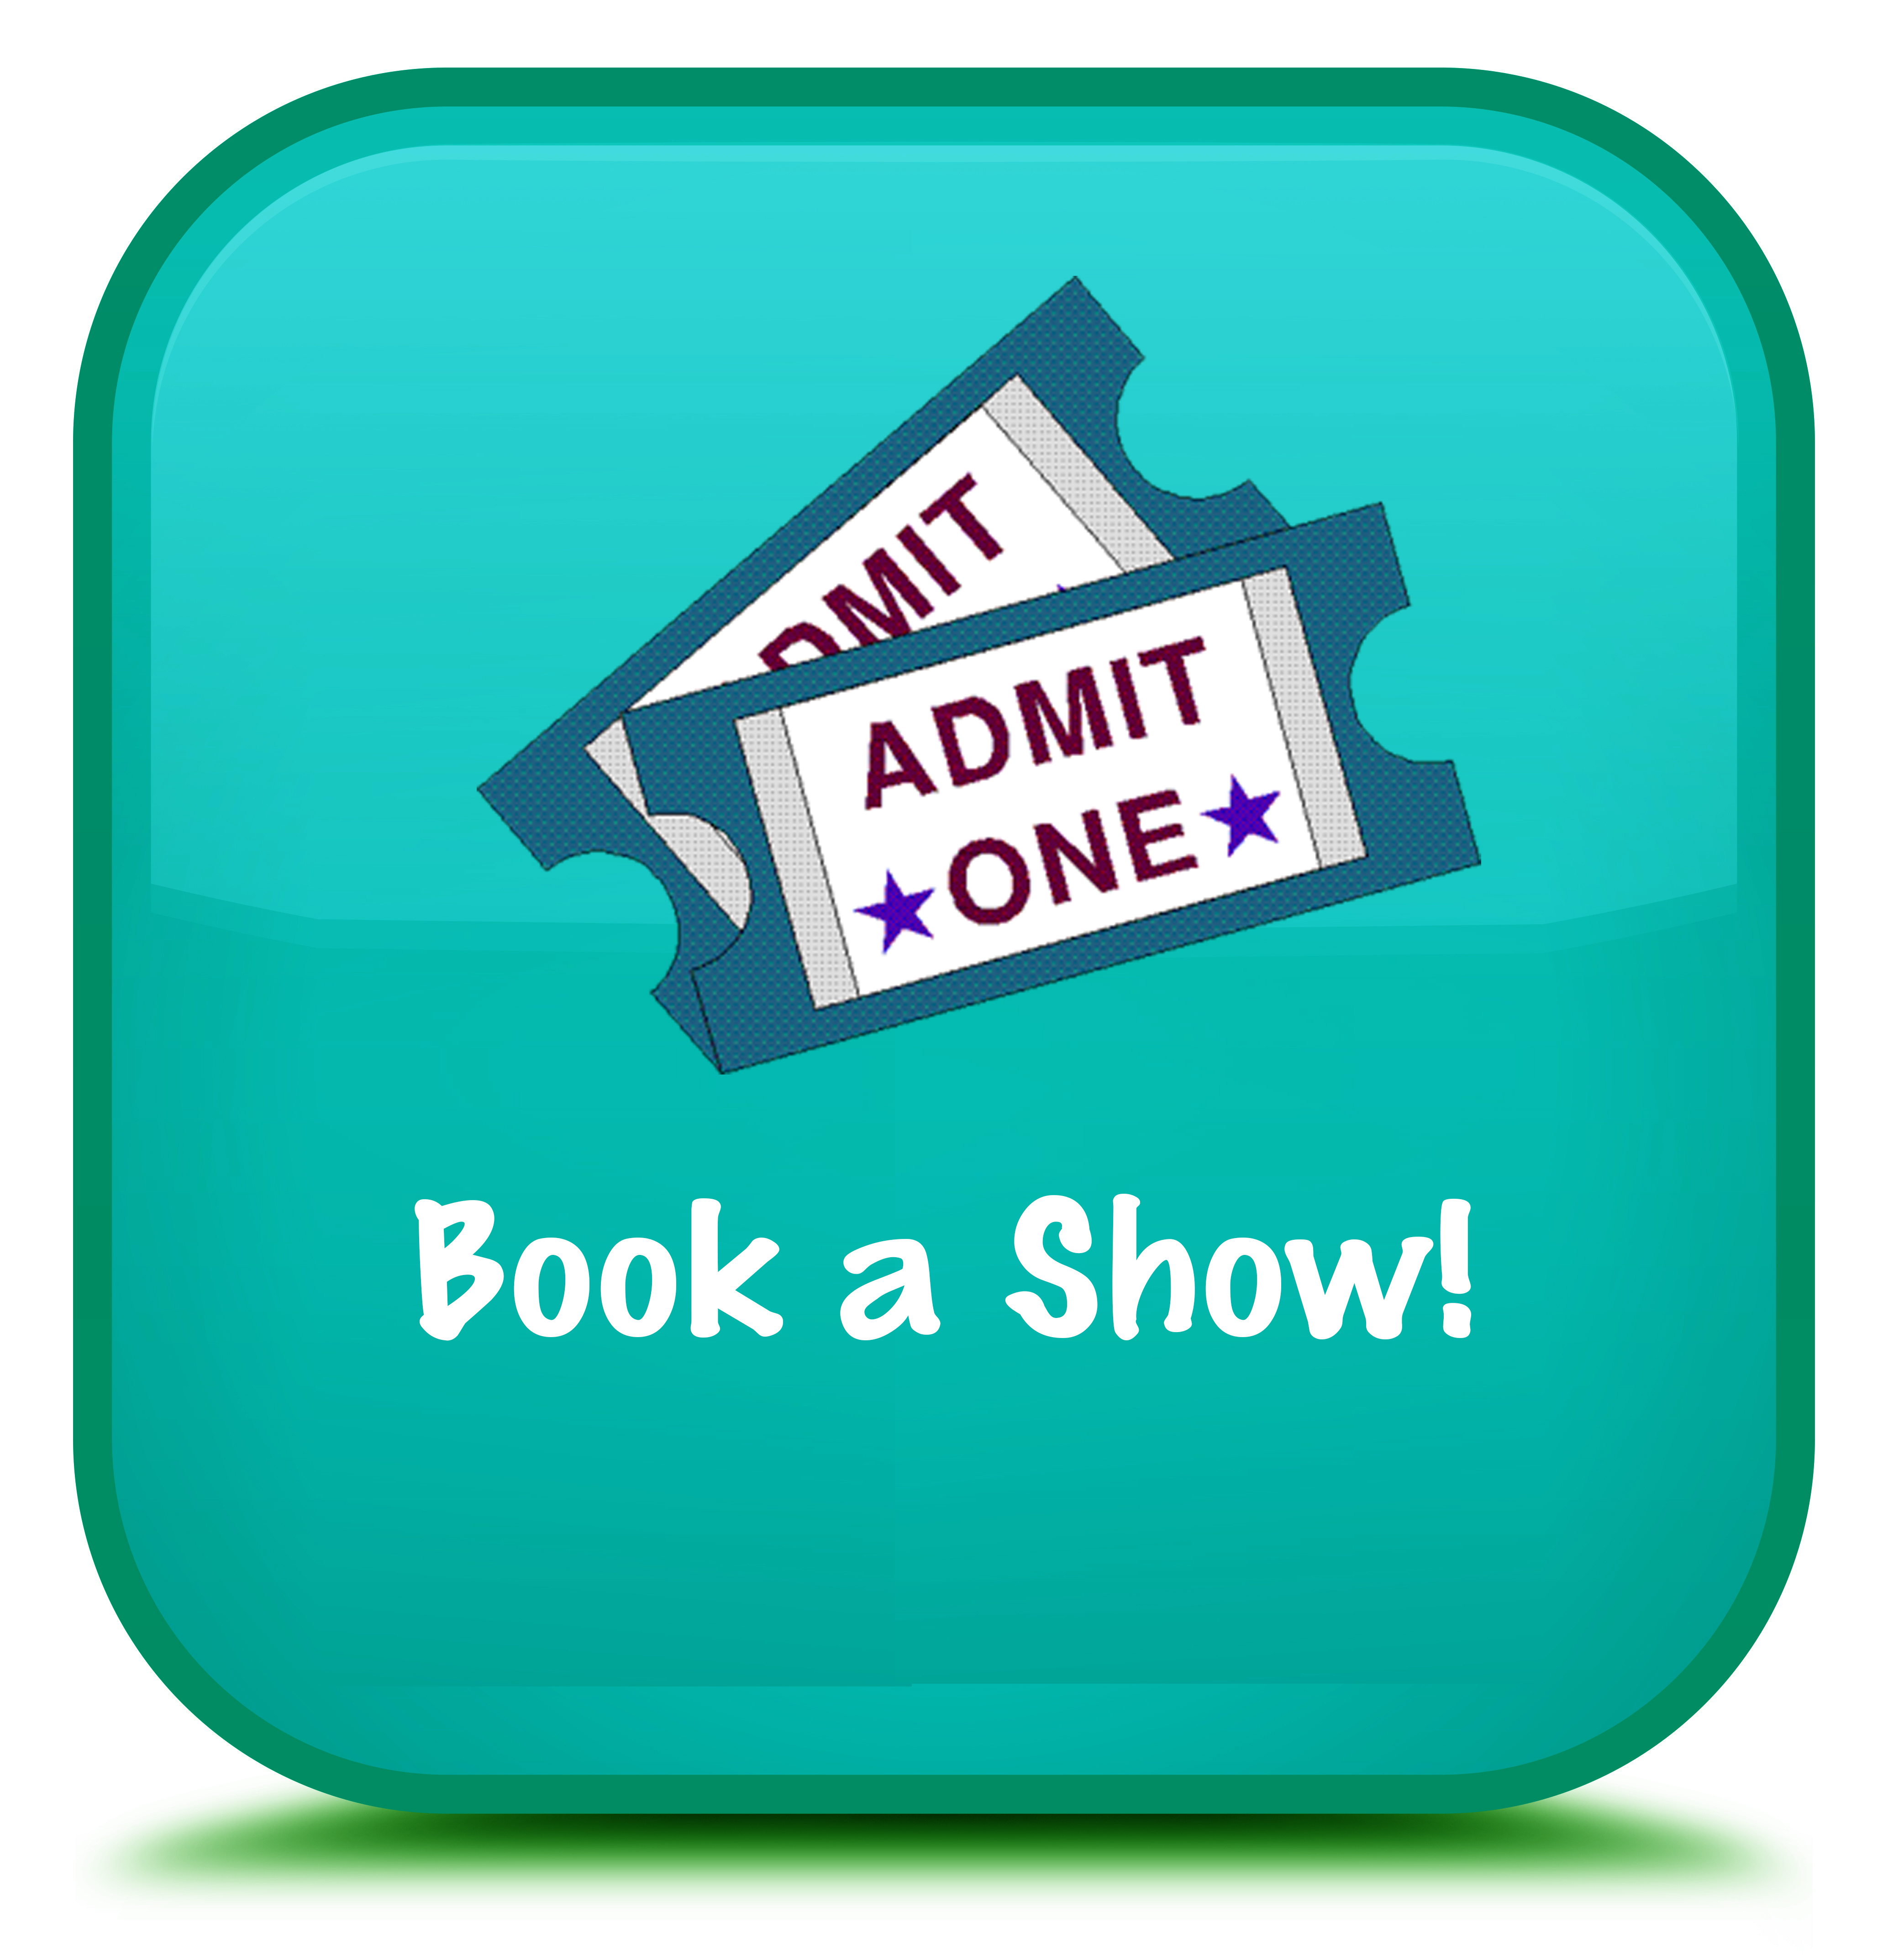 Click here to book a show